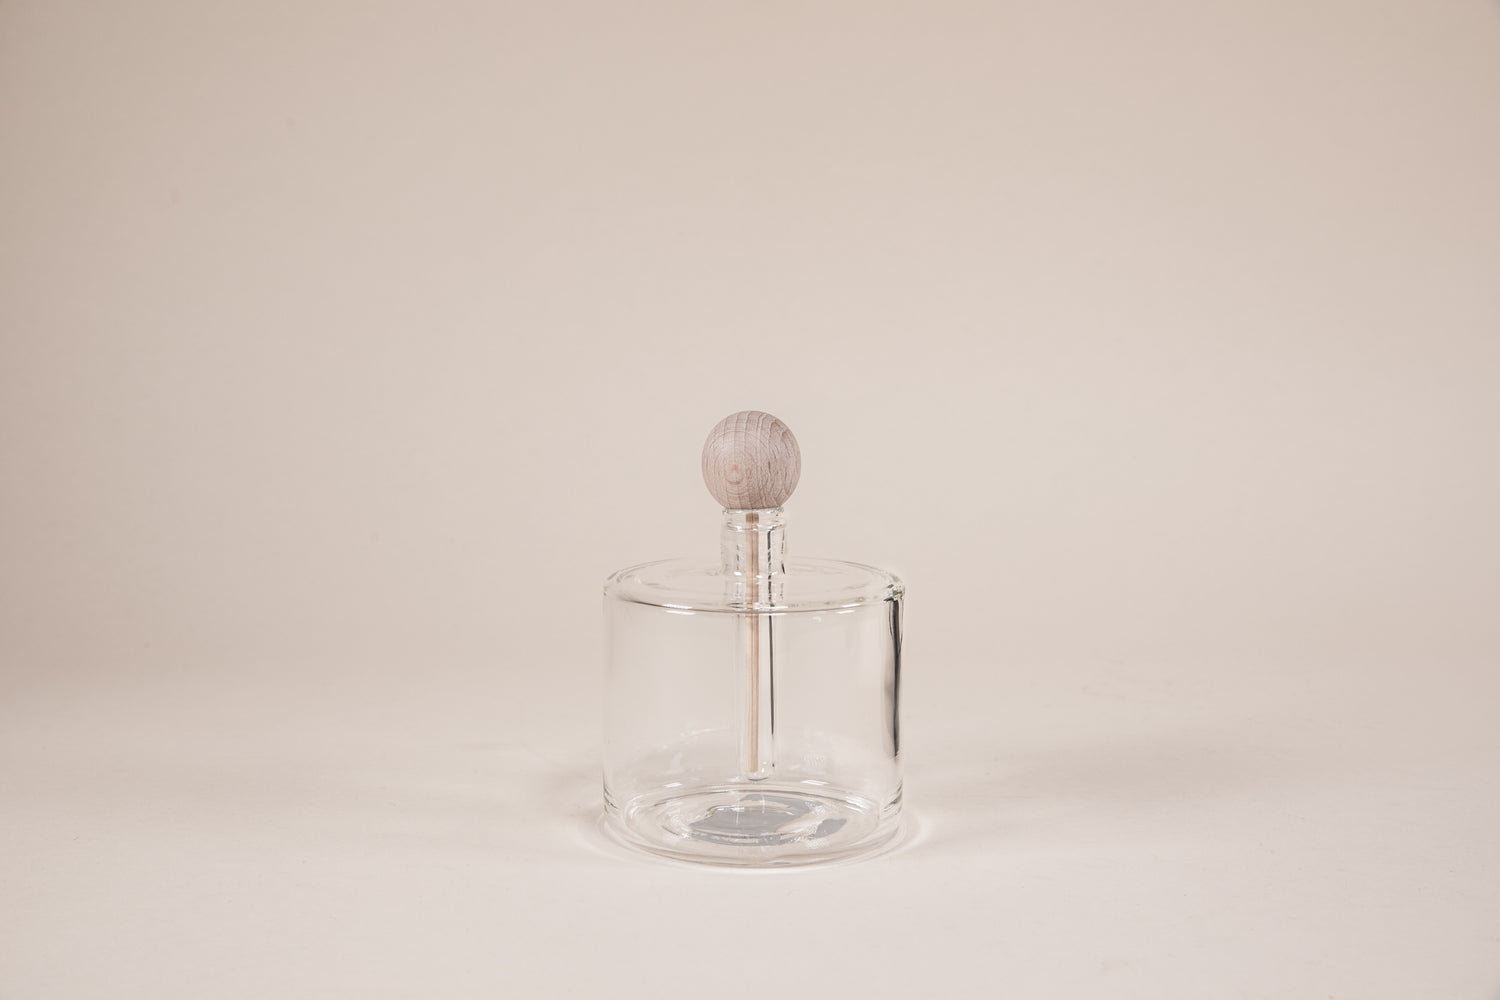 Round glass diffuser with natural wood wand and round knob.